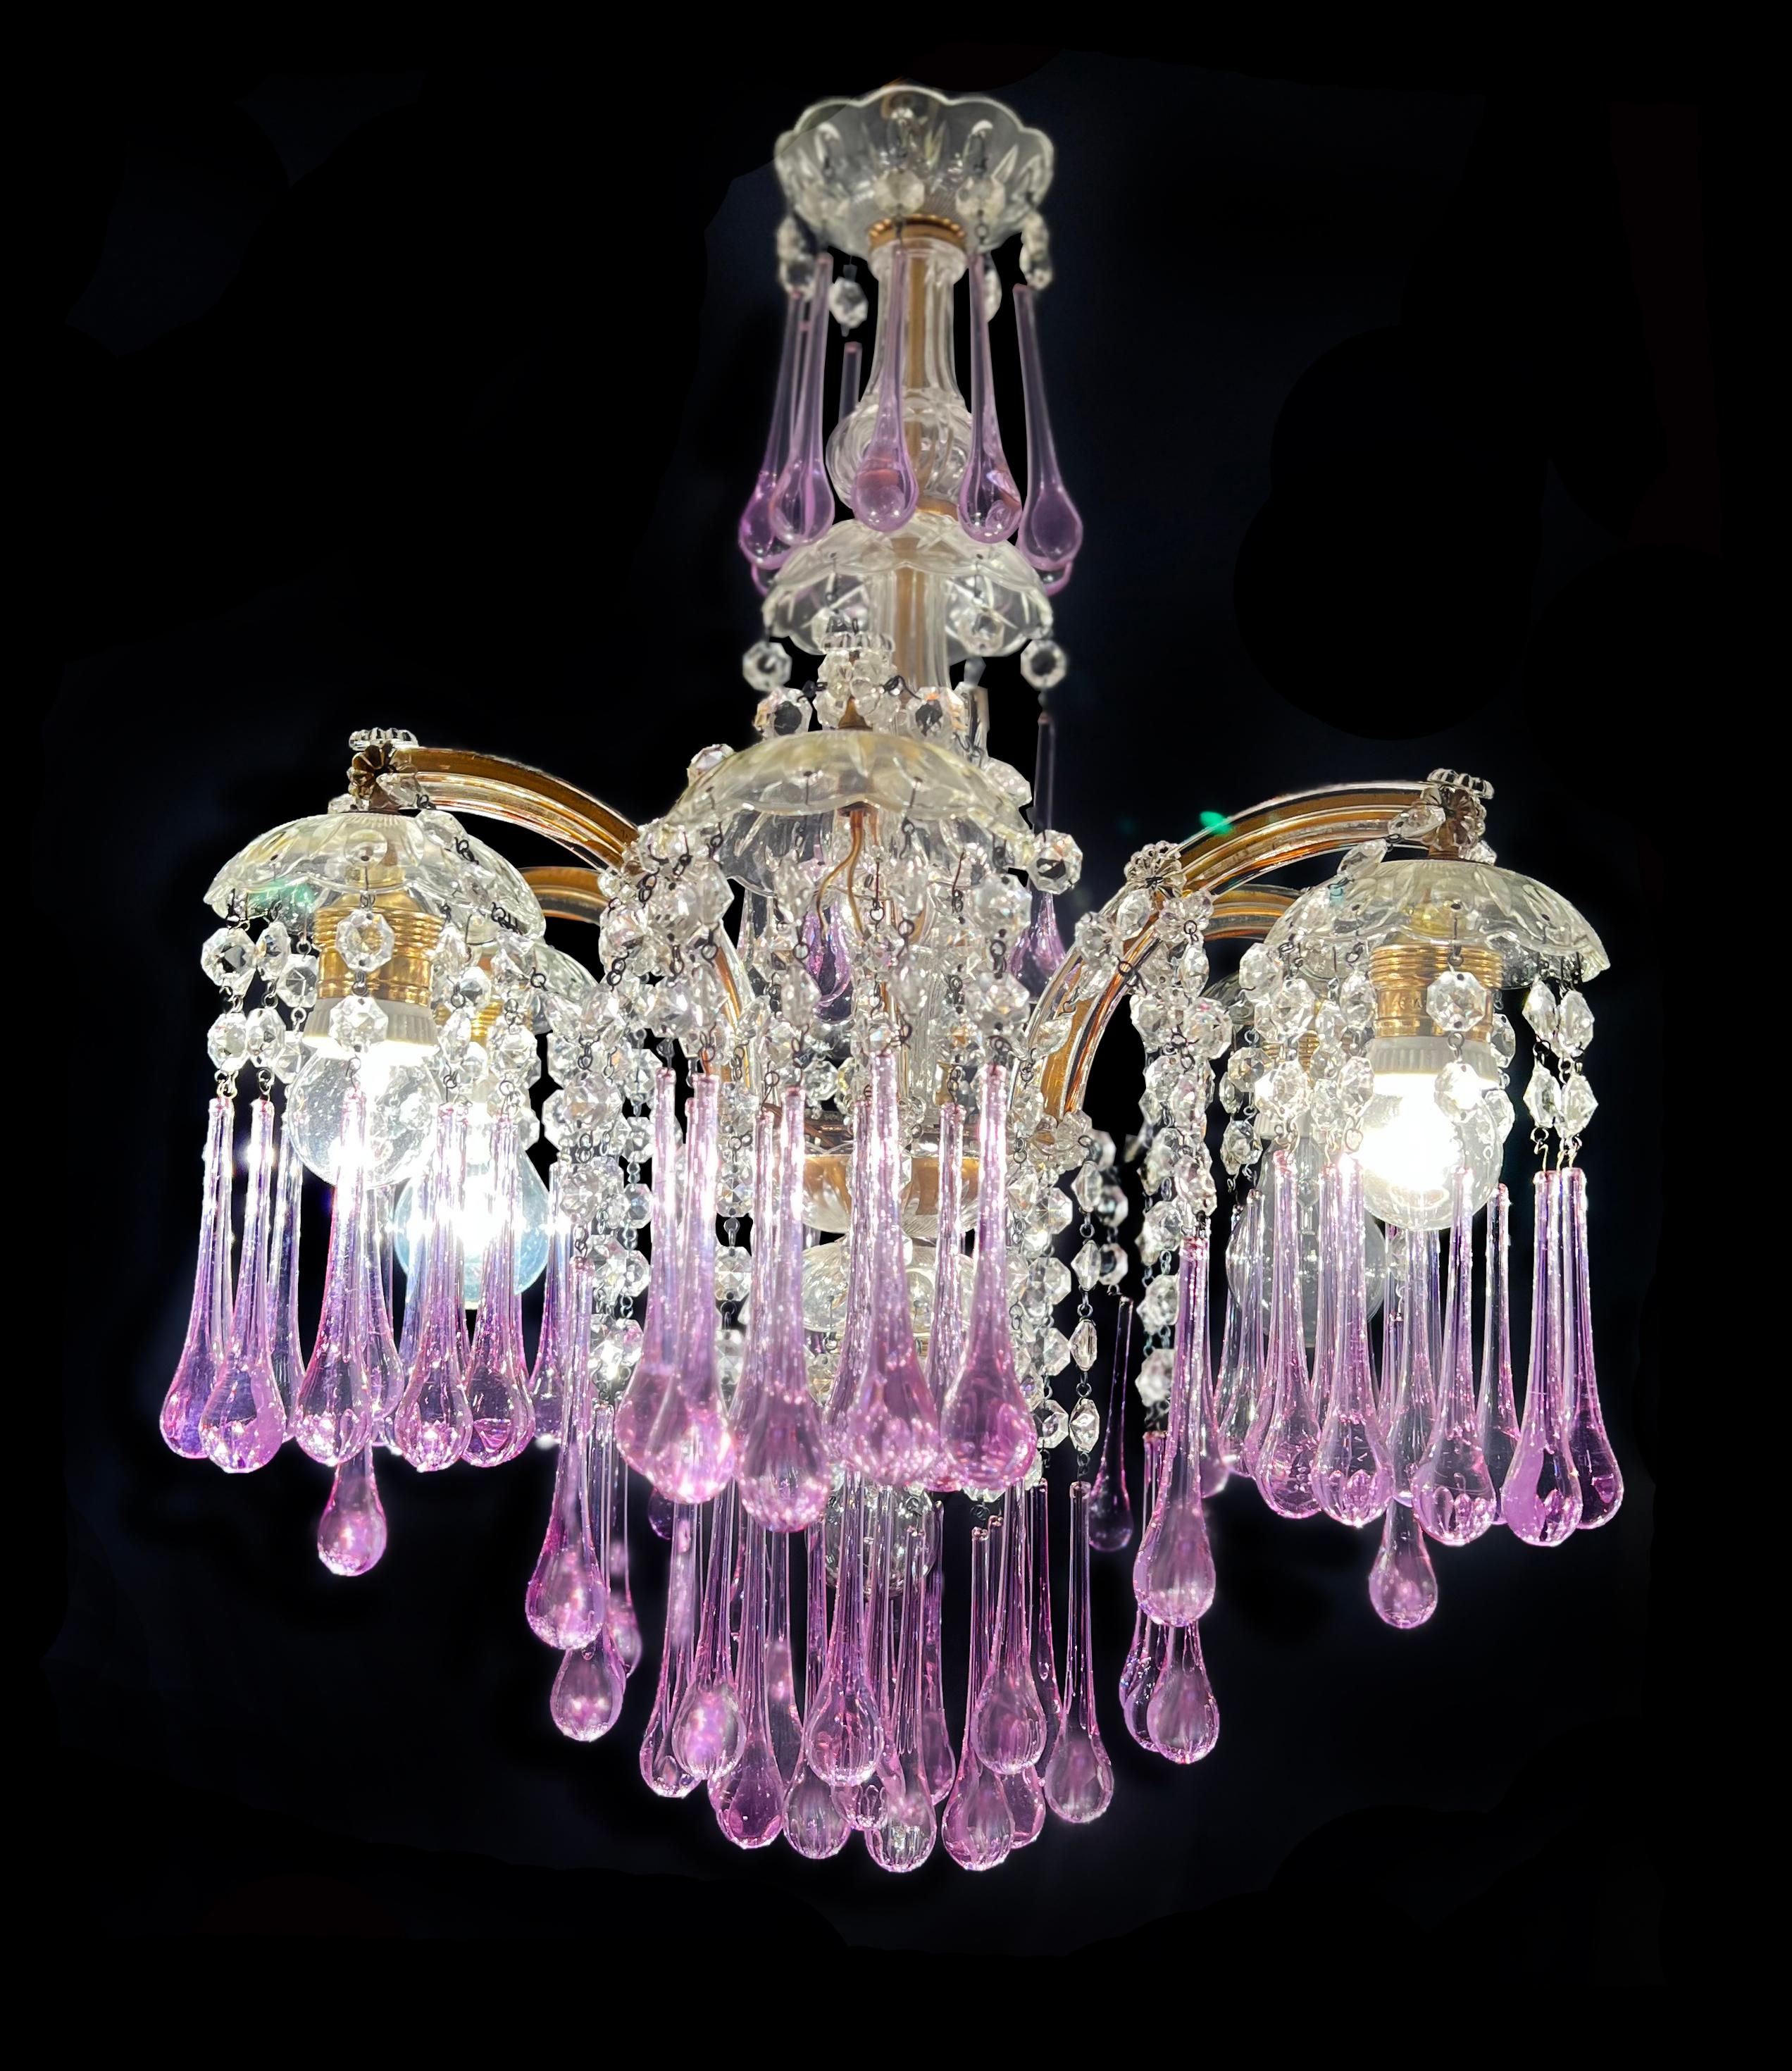 Fascinating Murano chandelier inspired by the divine Liz Taylor.
Height without chain 60 cm, diameter 42 cm. Seven light E27